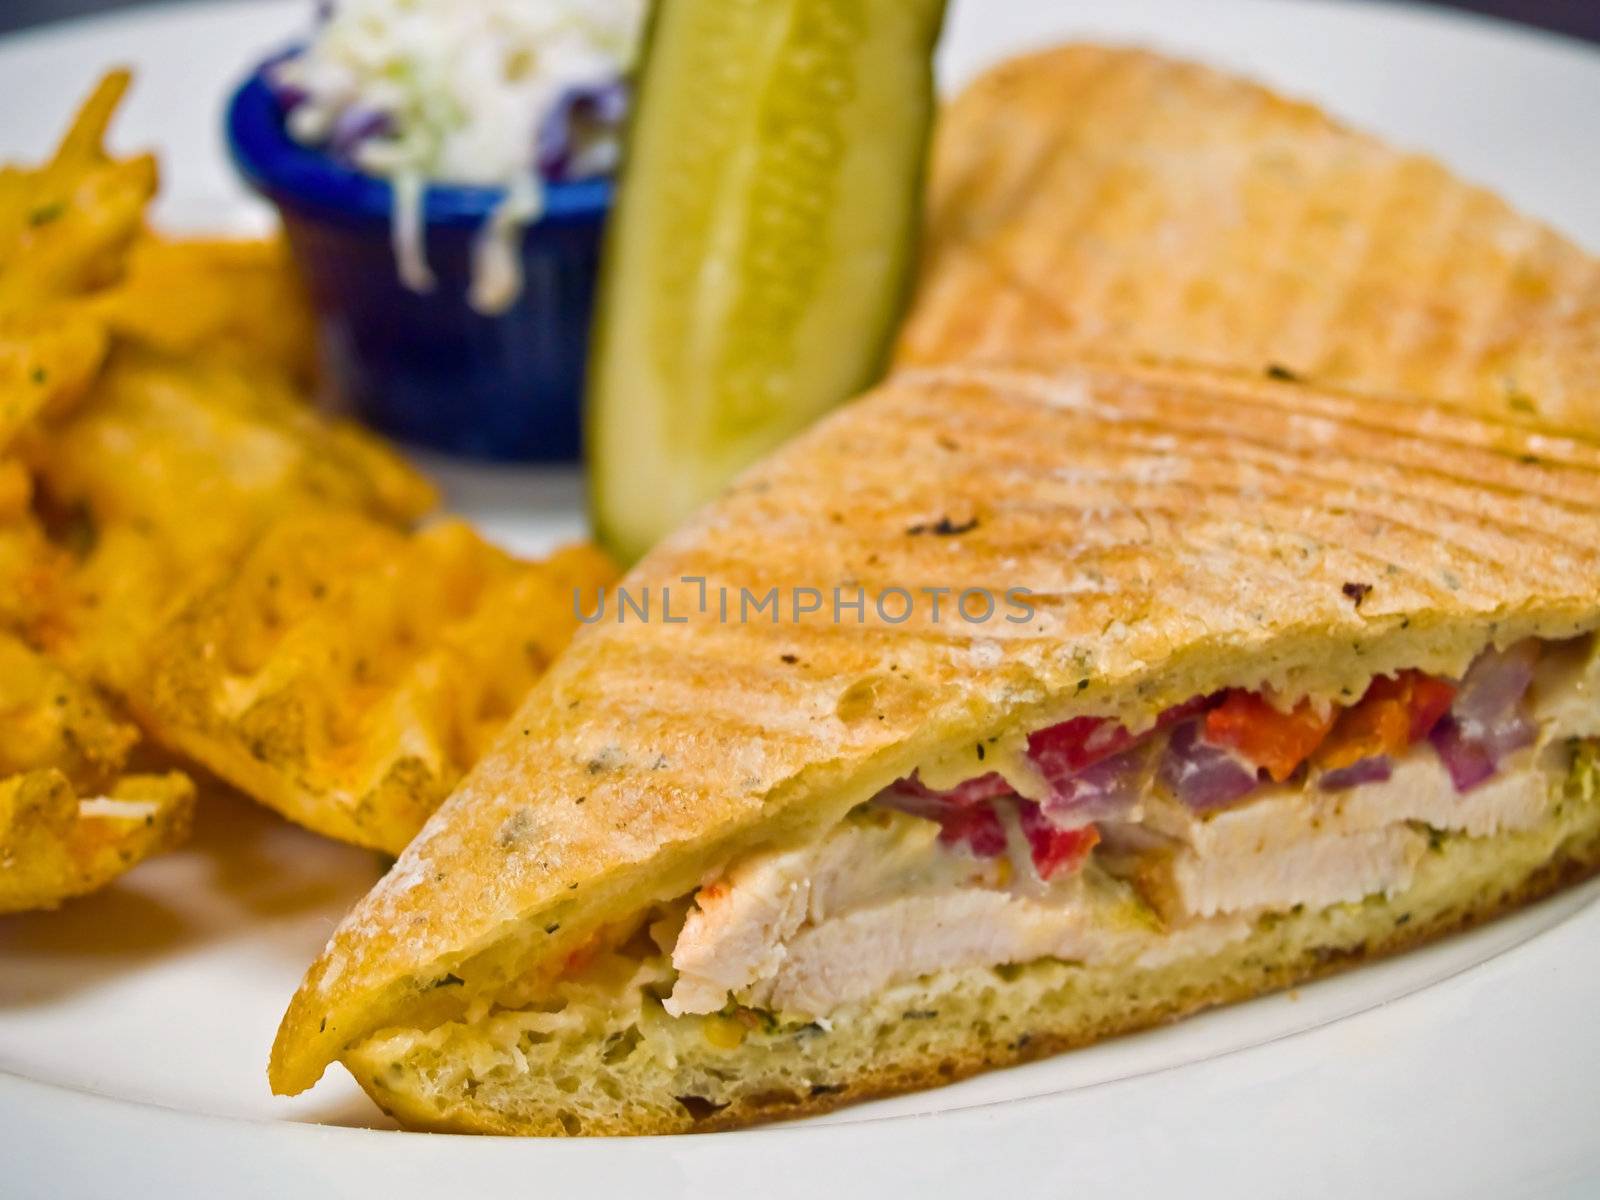 Grilled Chicken Panini with Cole Slaw, Pickle and Fried Potatoes